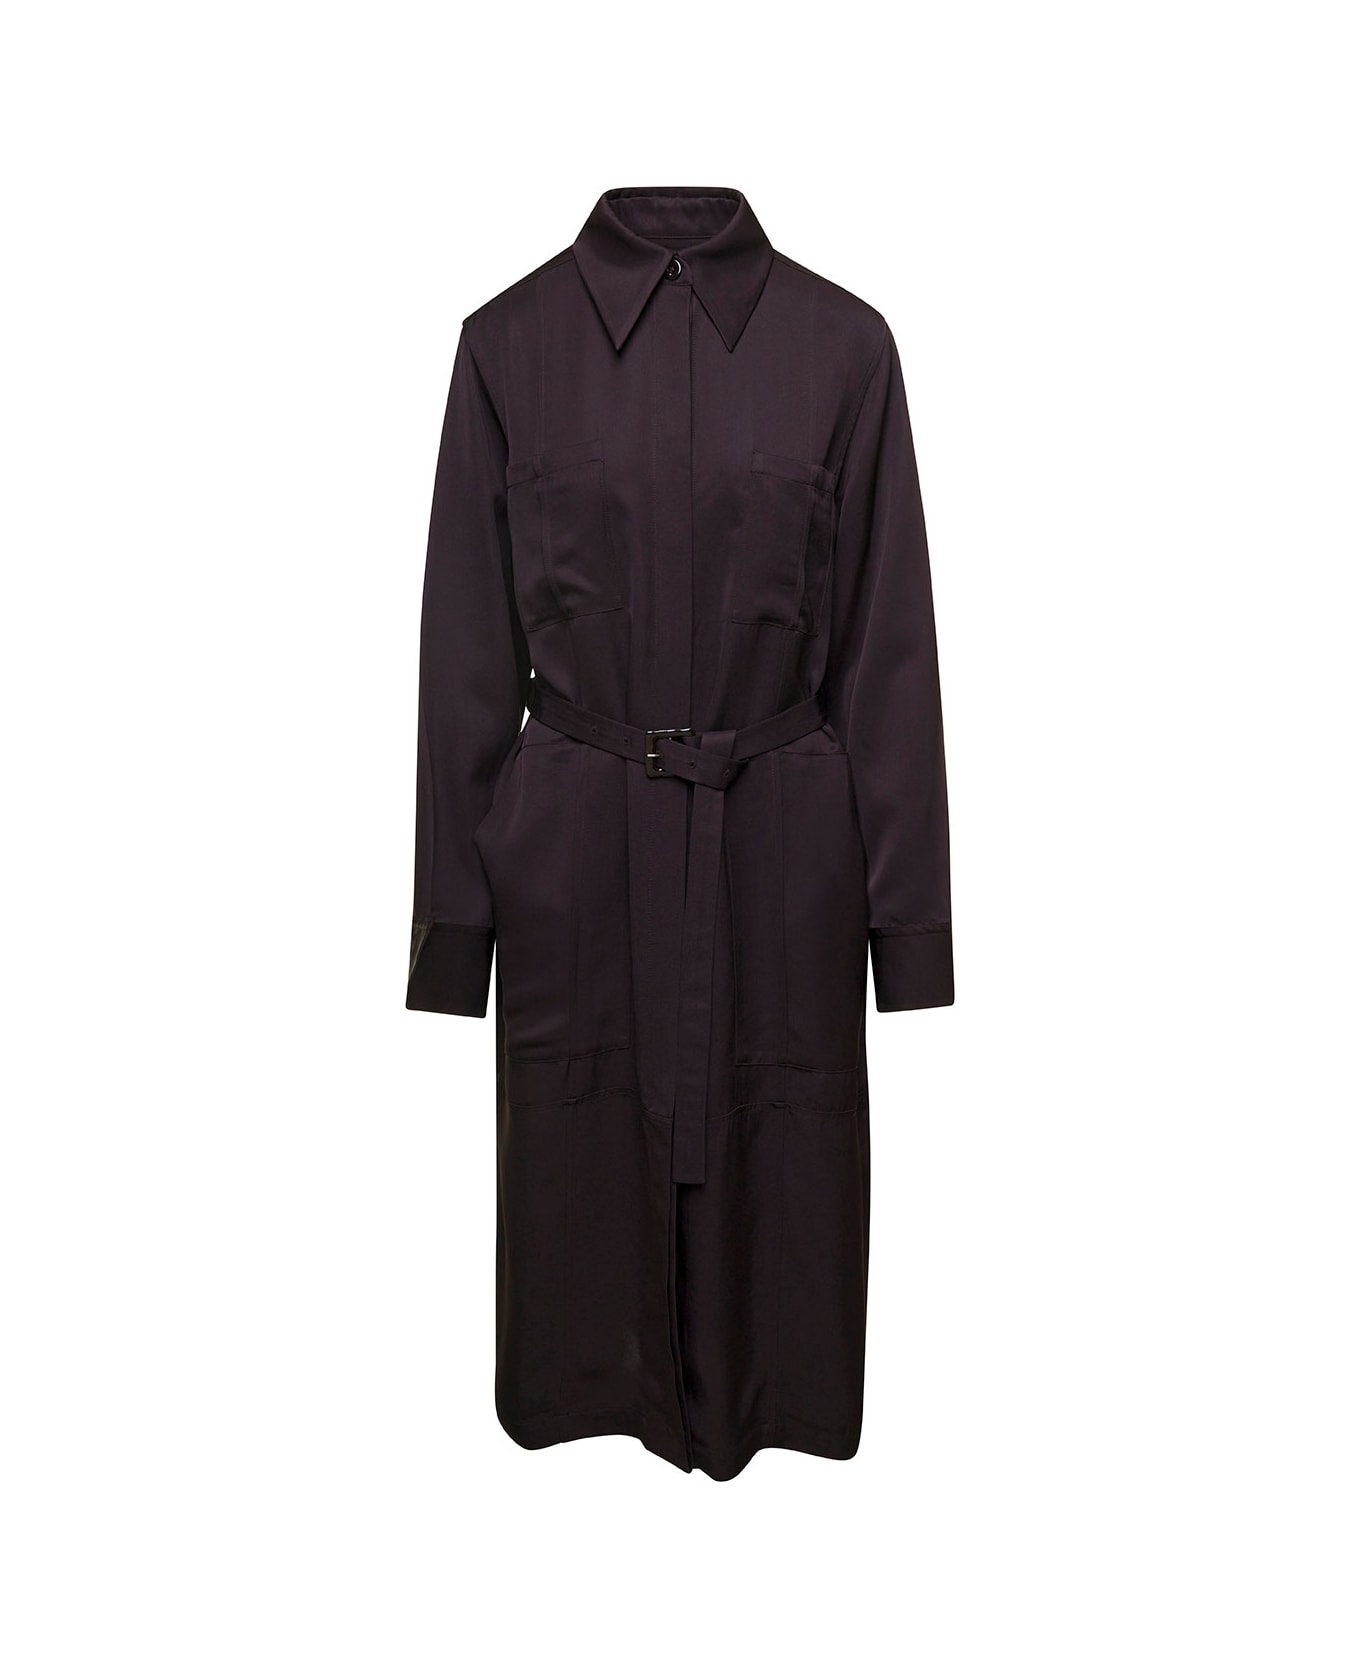 Jil Sander Brown Belted Coat With Classic Collar In Viscose Twill Woman - Brown